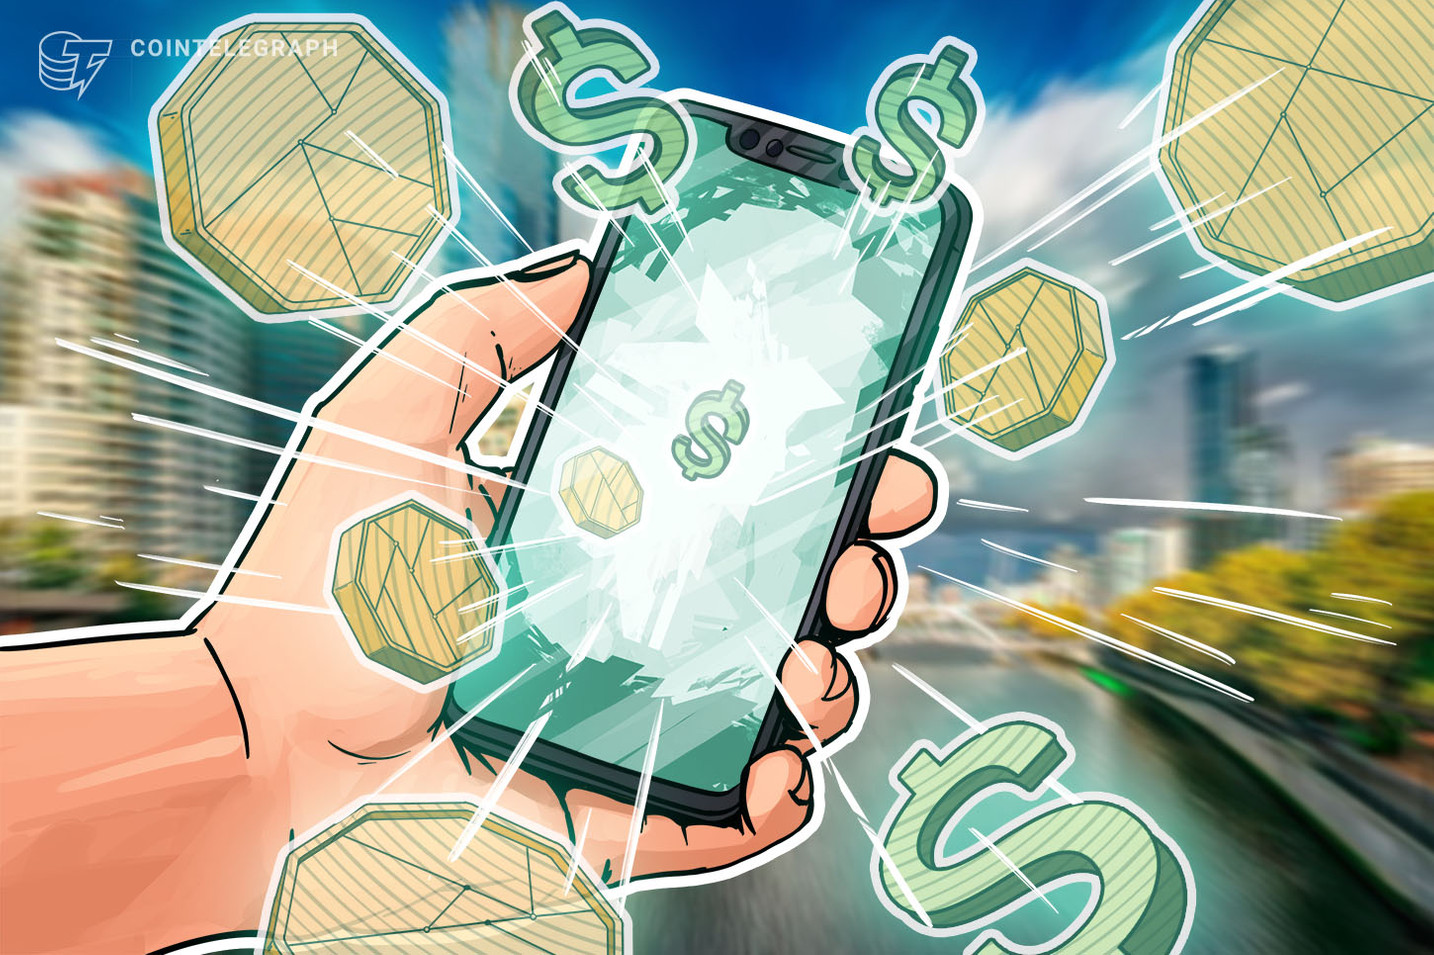 Coinsquare launches Quick Trade mobile app with instant funding